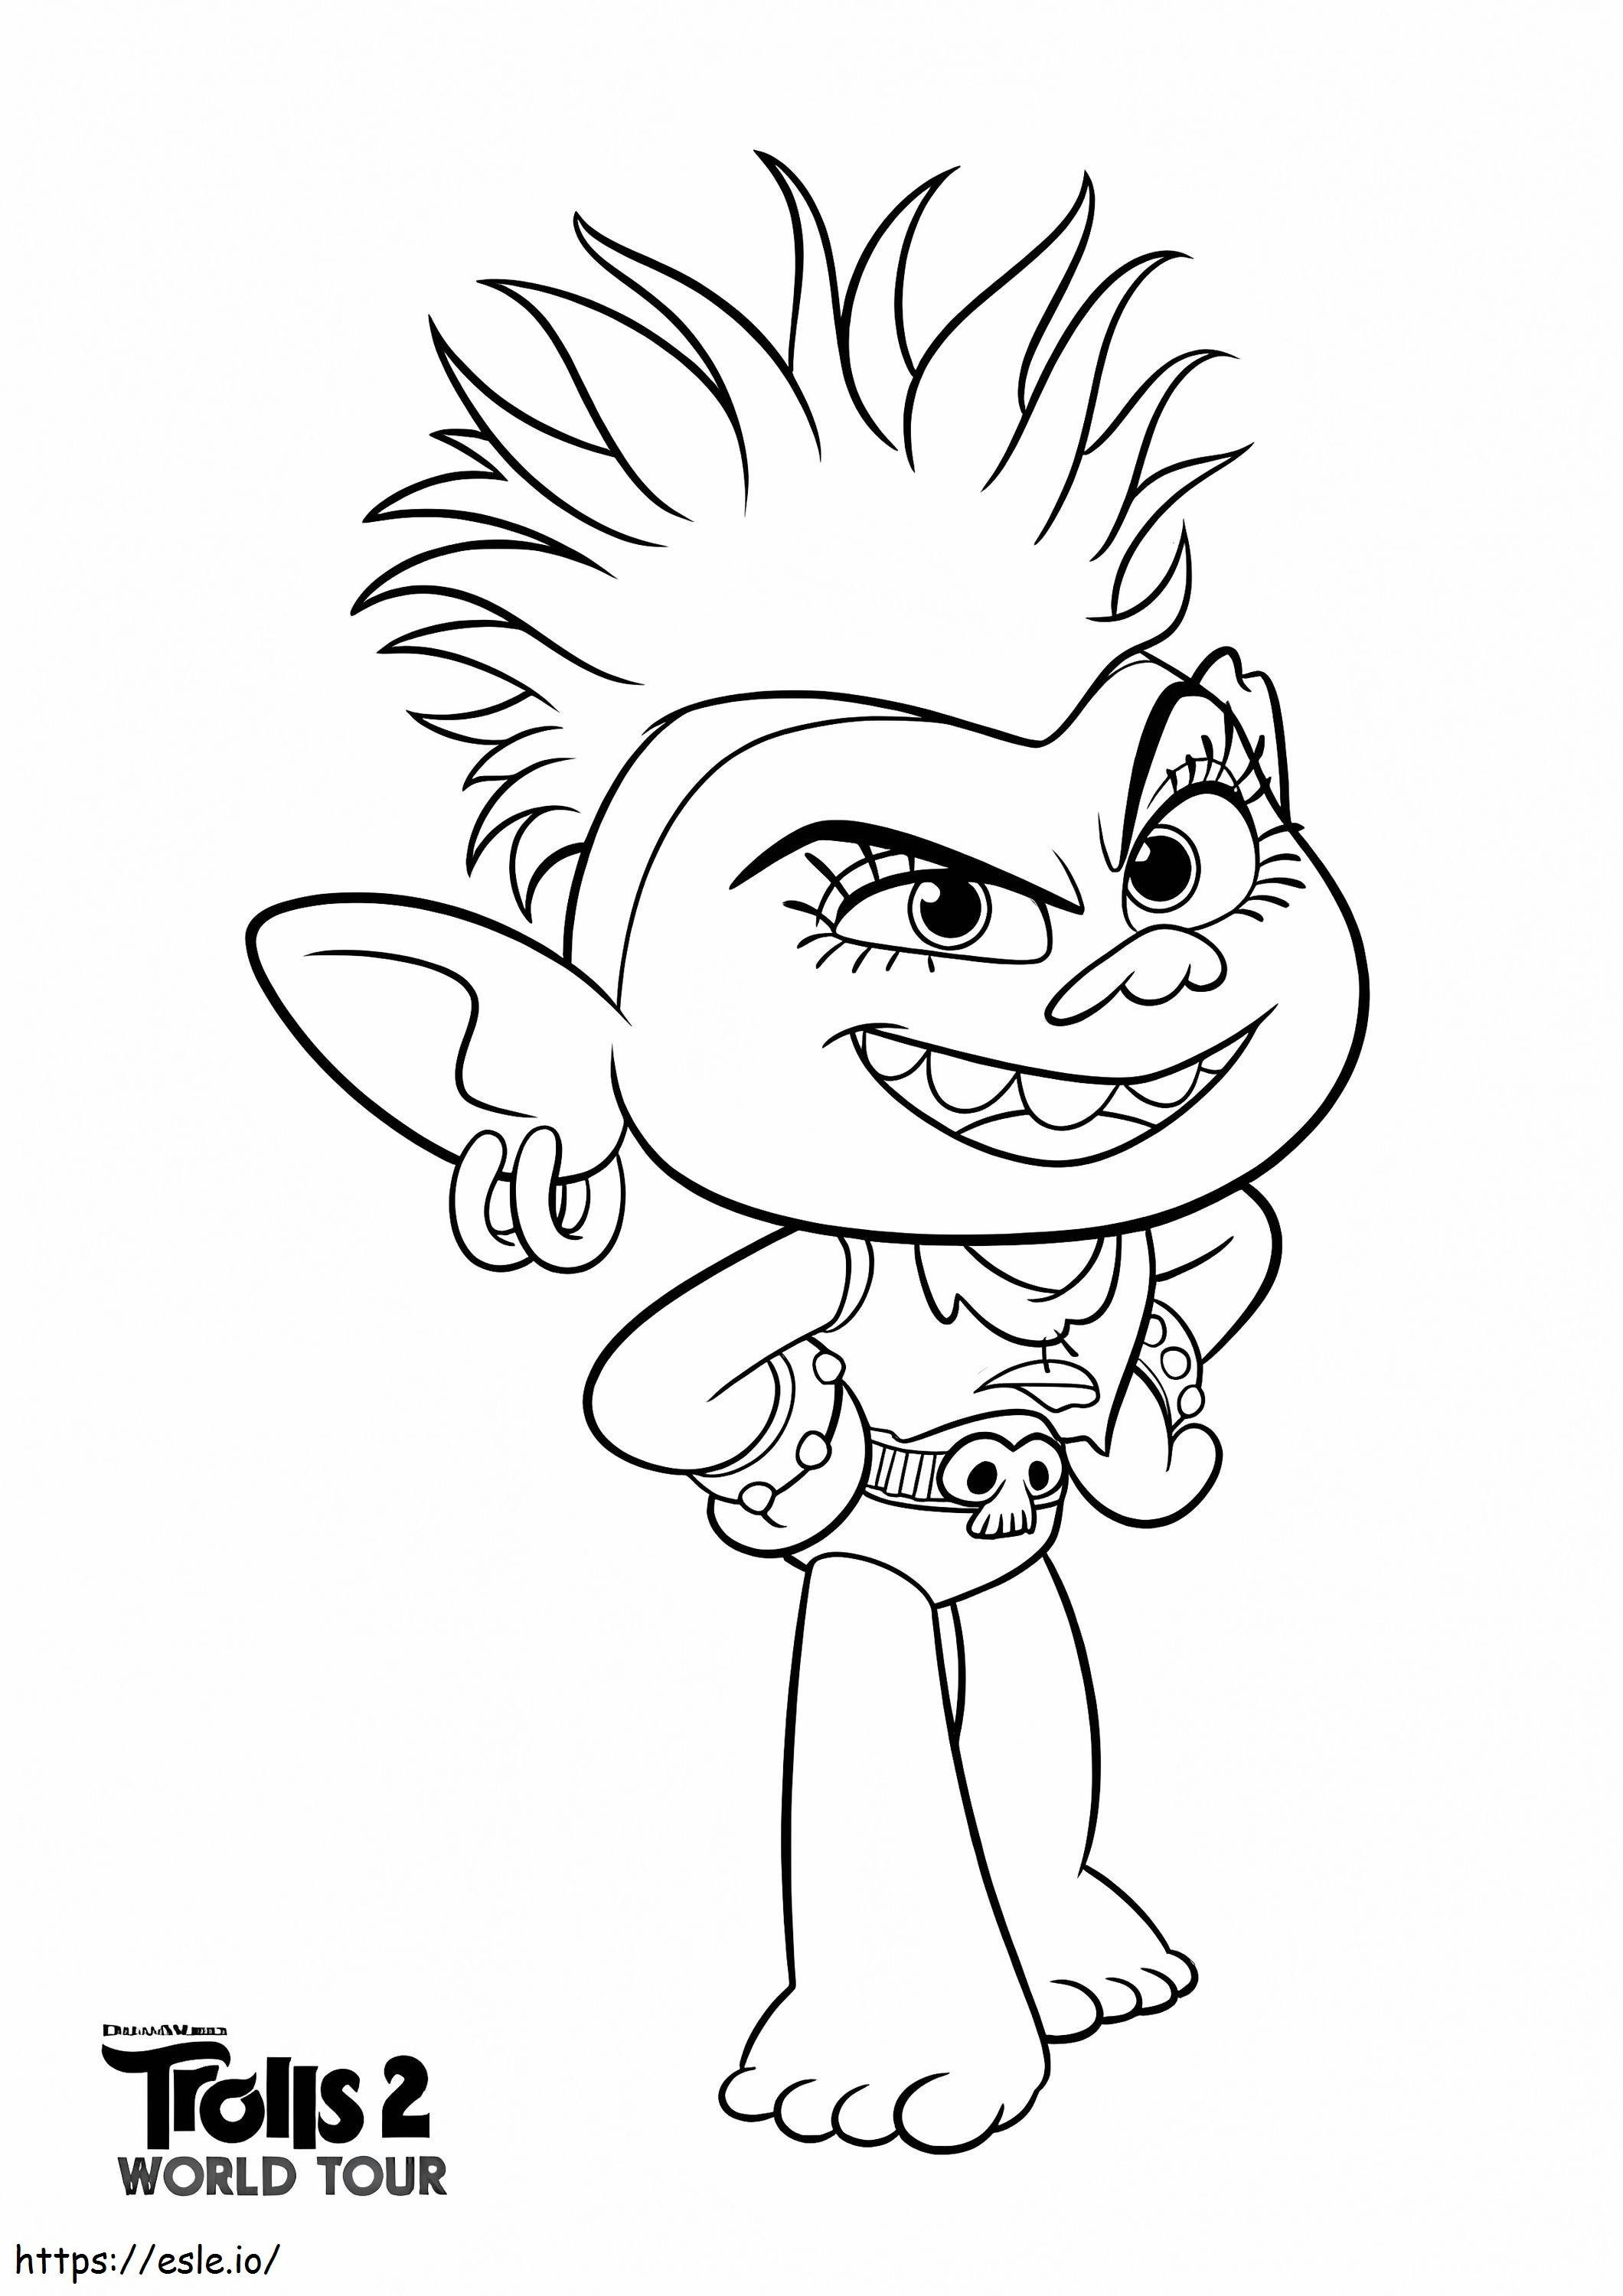 Fresco Barb coloring page